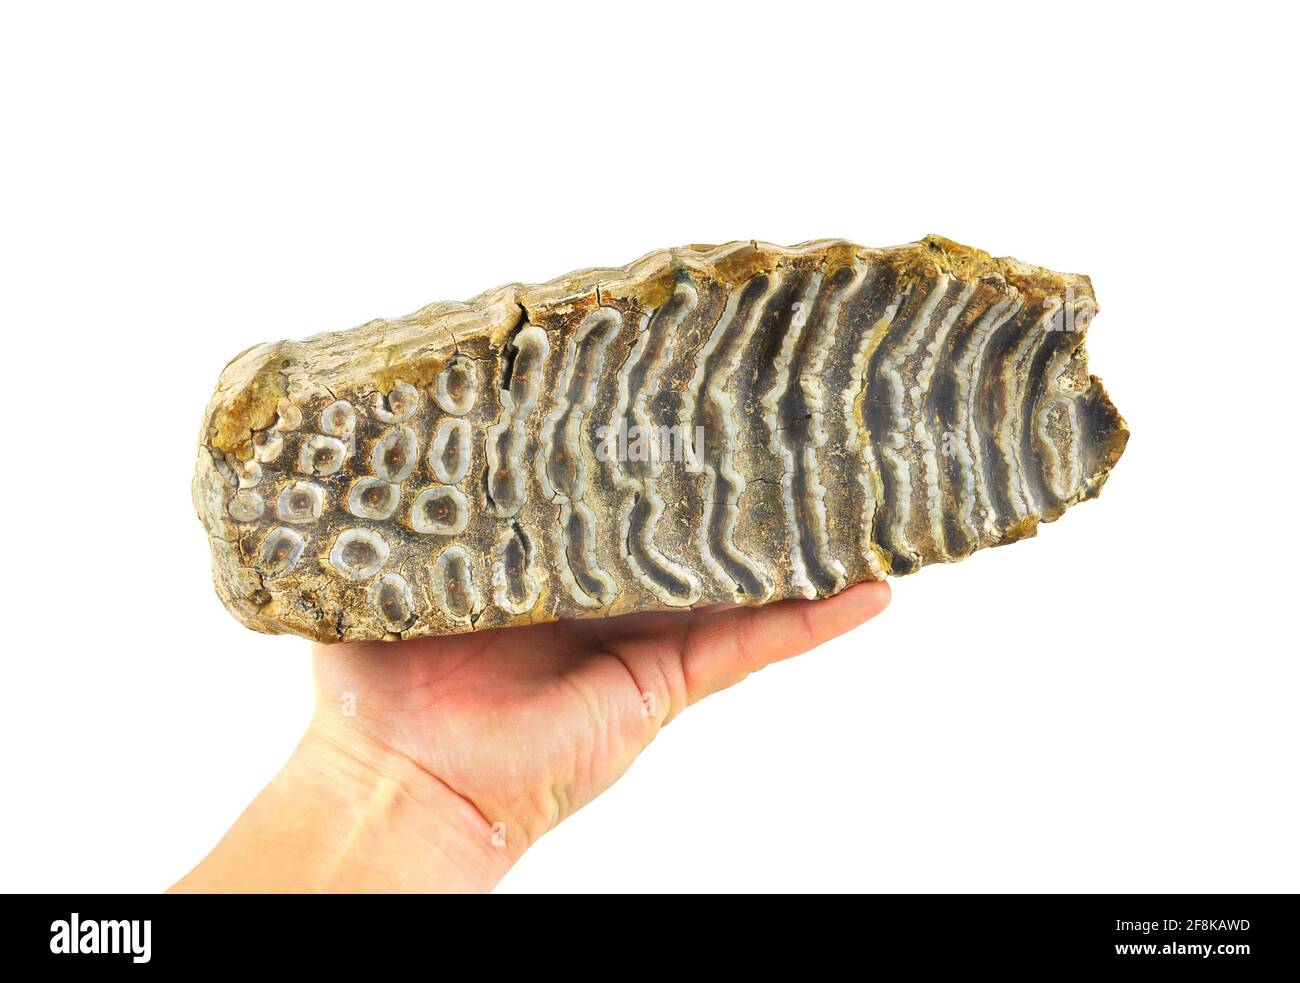 Hand holding Mammoth tooth, isolated on a white background. Stock Photo